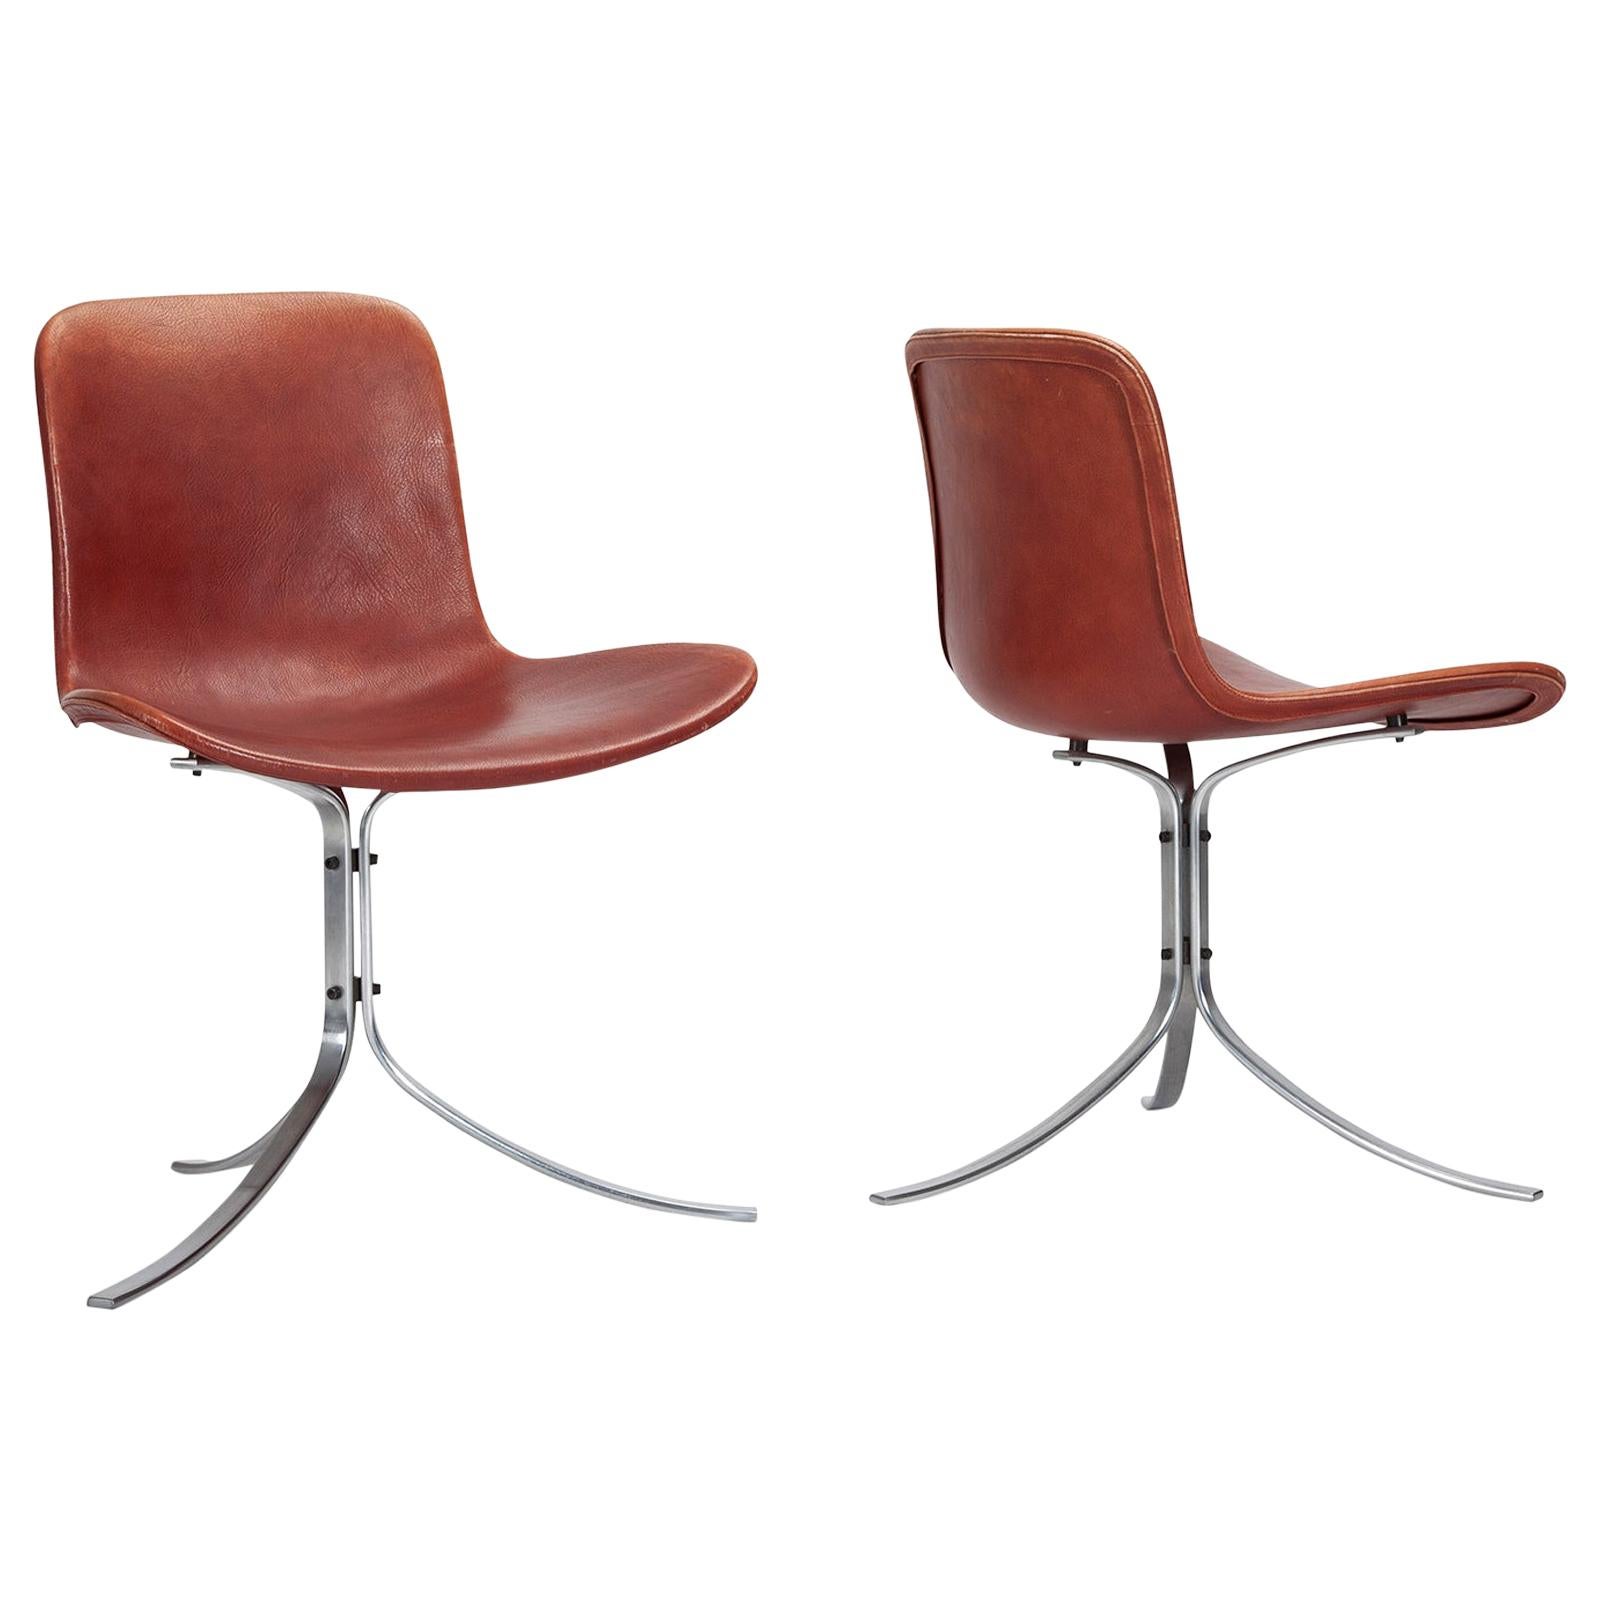 Pair of Original Edition PK 9 Chairs by Poul Kjærholm For Sale